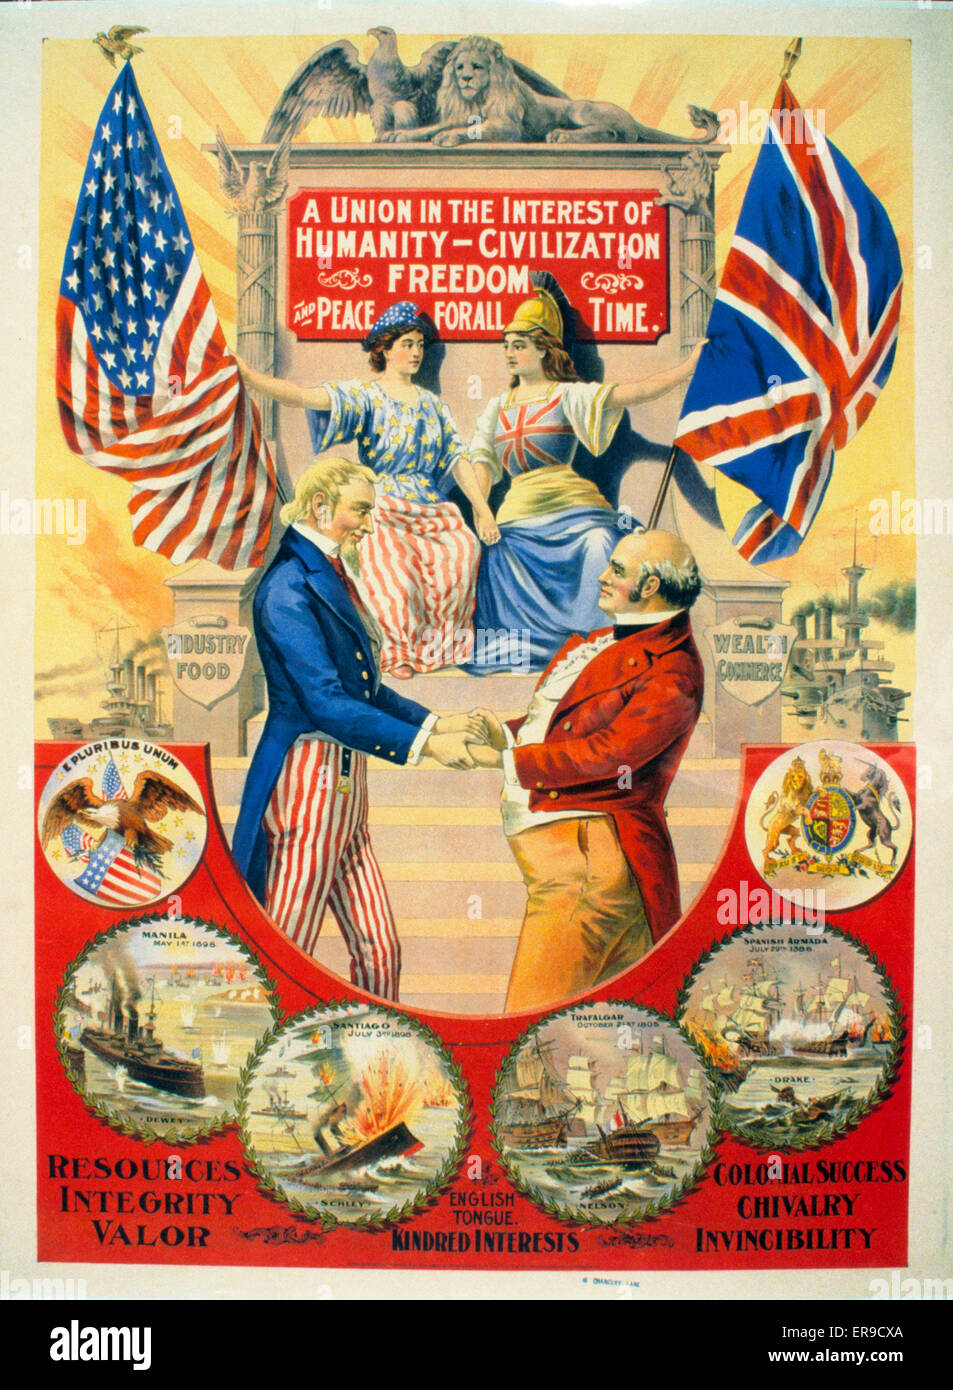  WONDERFULITEMS an American Triumph Rochester FAIR in HUMANITY'S  Cause Uncle SAM WAR Vintage Poster REPRO : Home & Kitchen